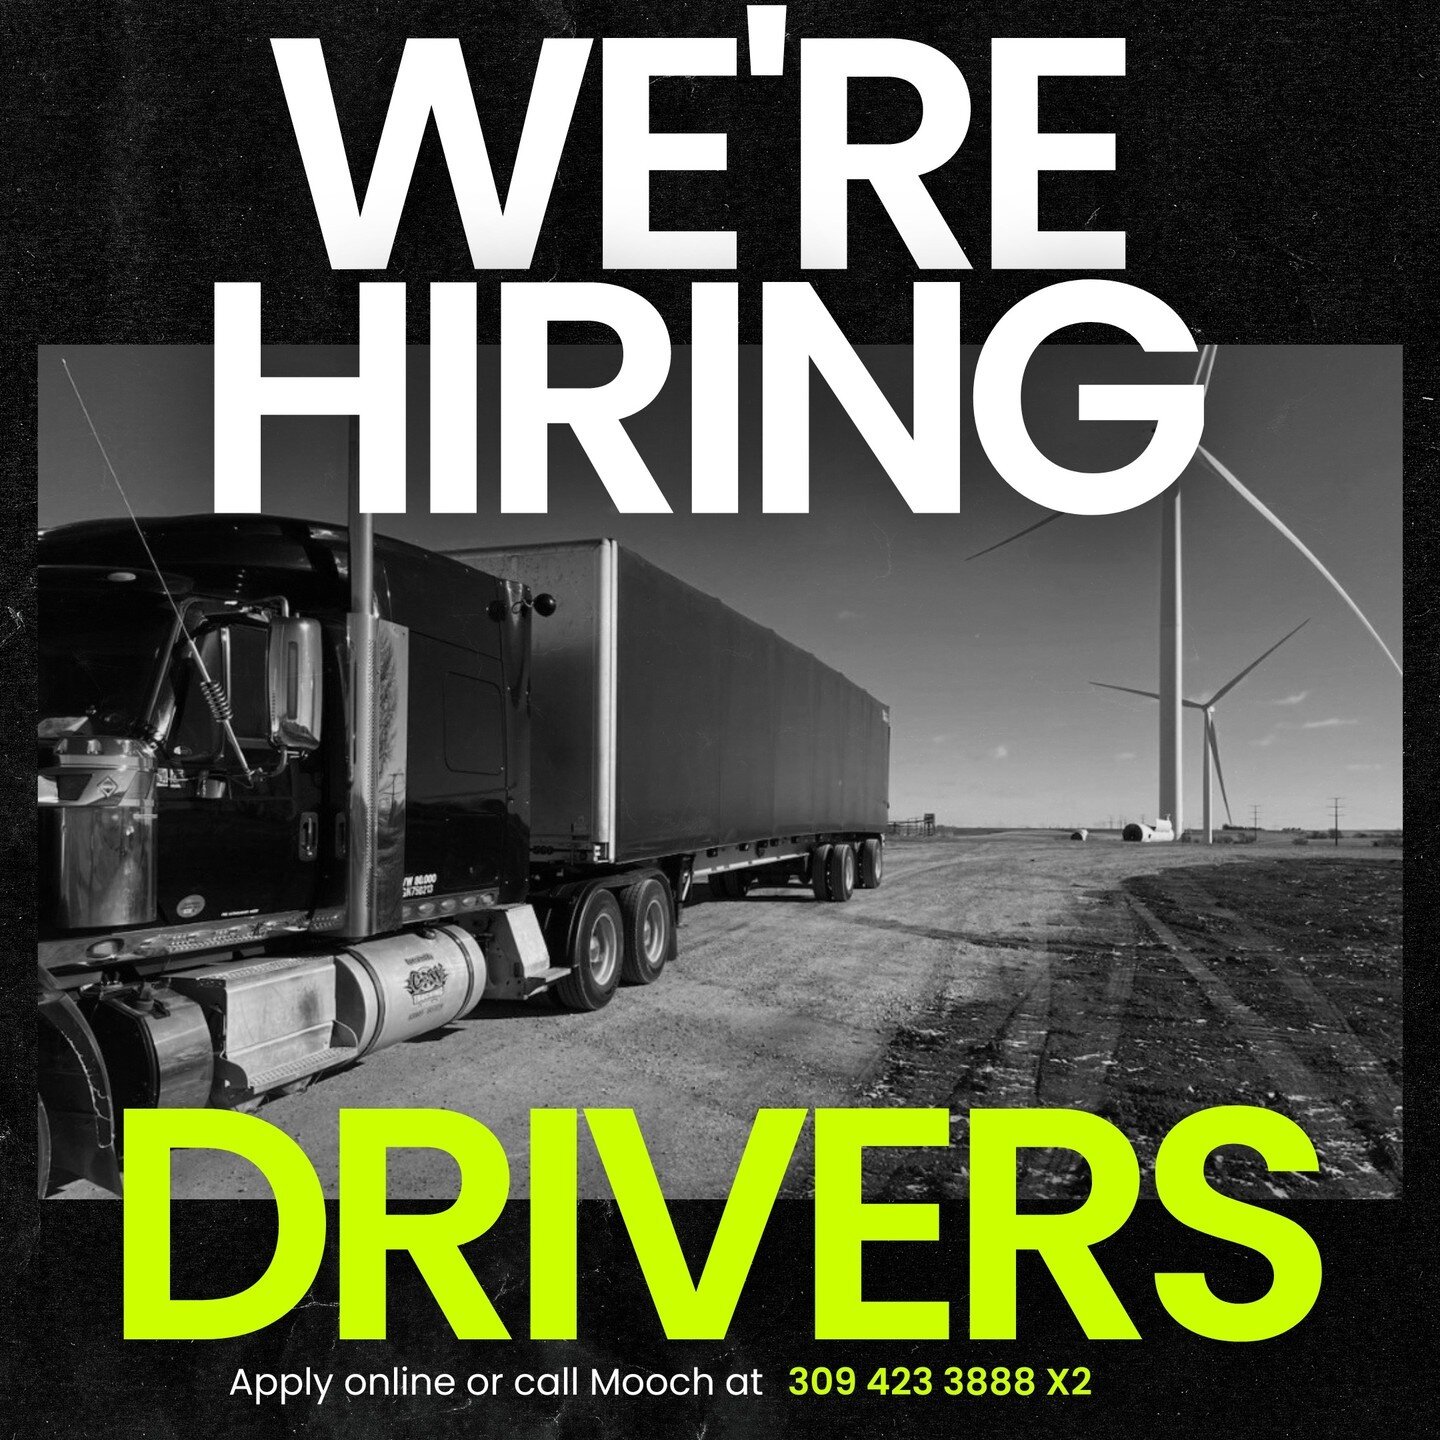 C&amp;W is looking to hire quality Company and Owner Operator Drivers out of Knoxville, TN and surrounding areas to join our ever-growing team.  We are offering great pay, consistent lanes, and frequent home time throughout TN, KY and NC. ⁠
 ⁠
Please